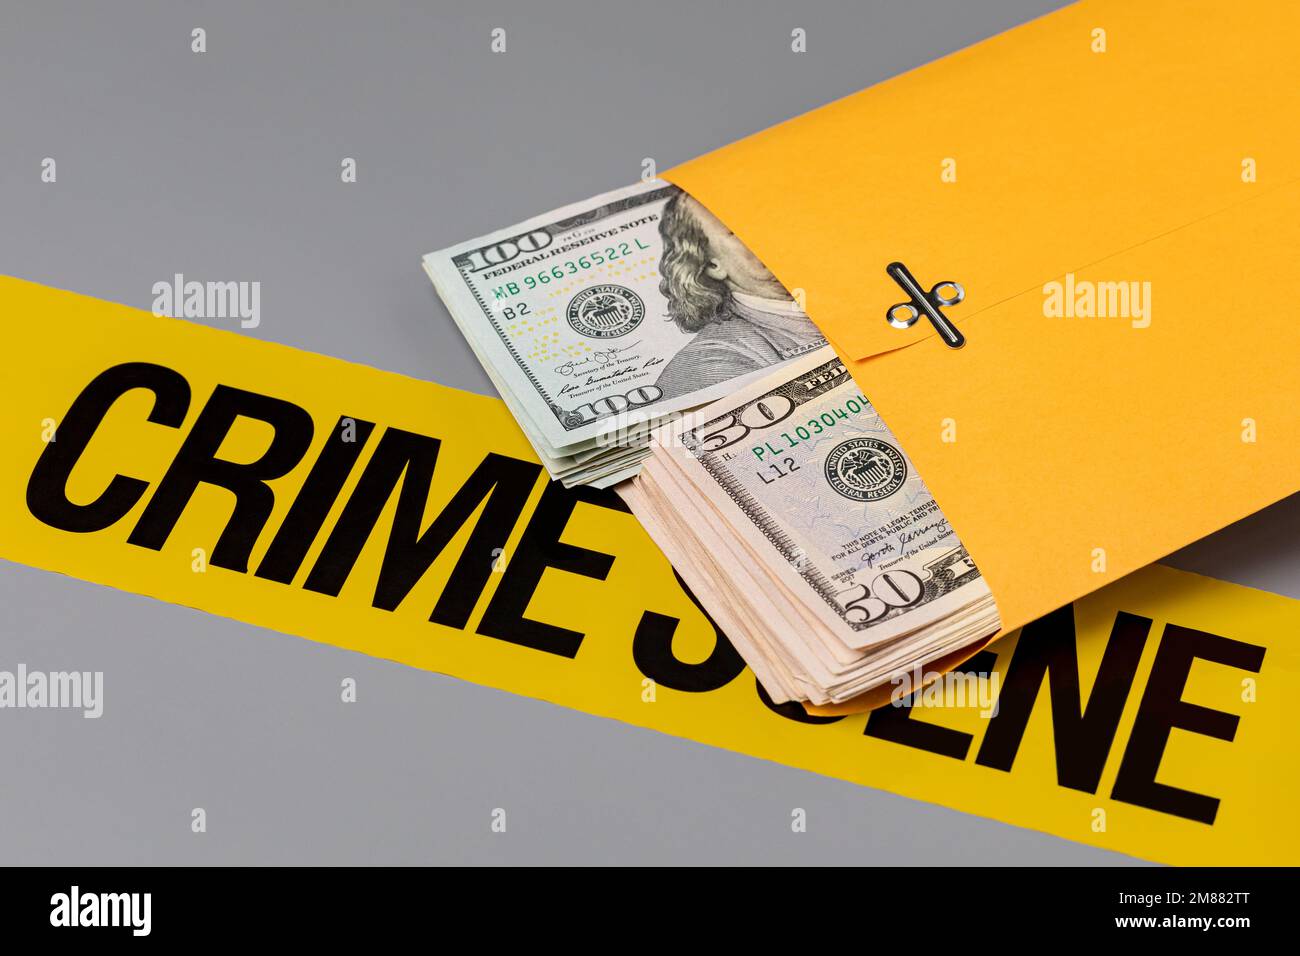 Cash money in envelope with crime scene tape. Bribery, tax evasion, and criminal activity concept Stock Photo